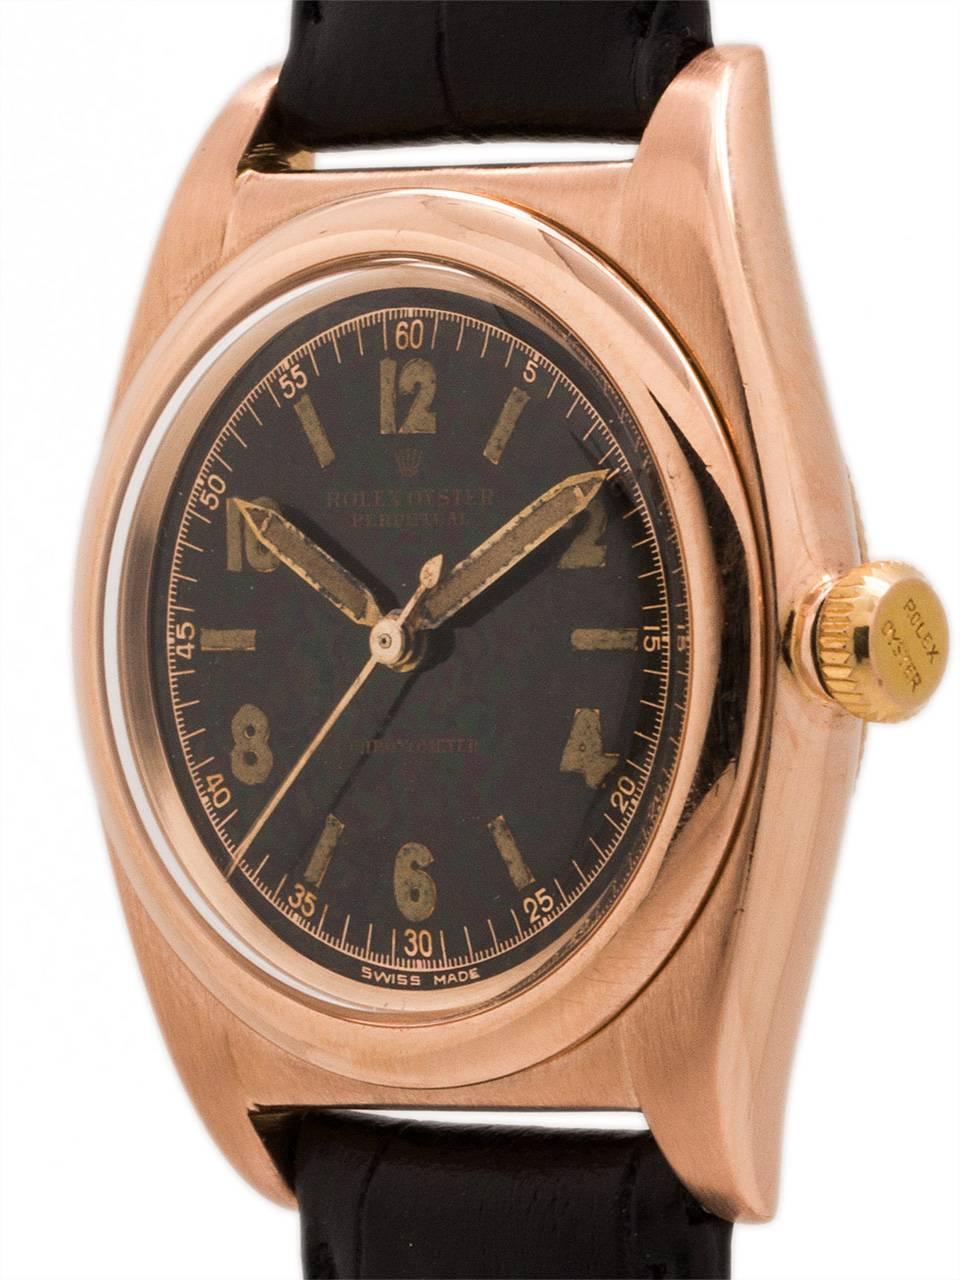 Great looking man’s Rolex Bubbleback 14K Rose Gold ref 3131 case serial # 444,xxx circa 1946 with very desirable original black luminous dial. Featuring 32mm diameter Oyster case with screw down caseback, screw down crown, smooth bezel, acrylic